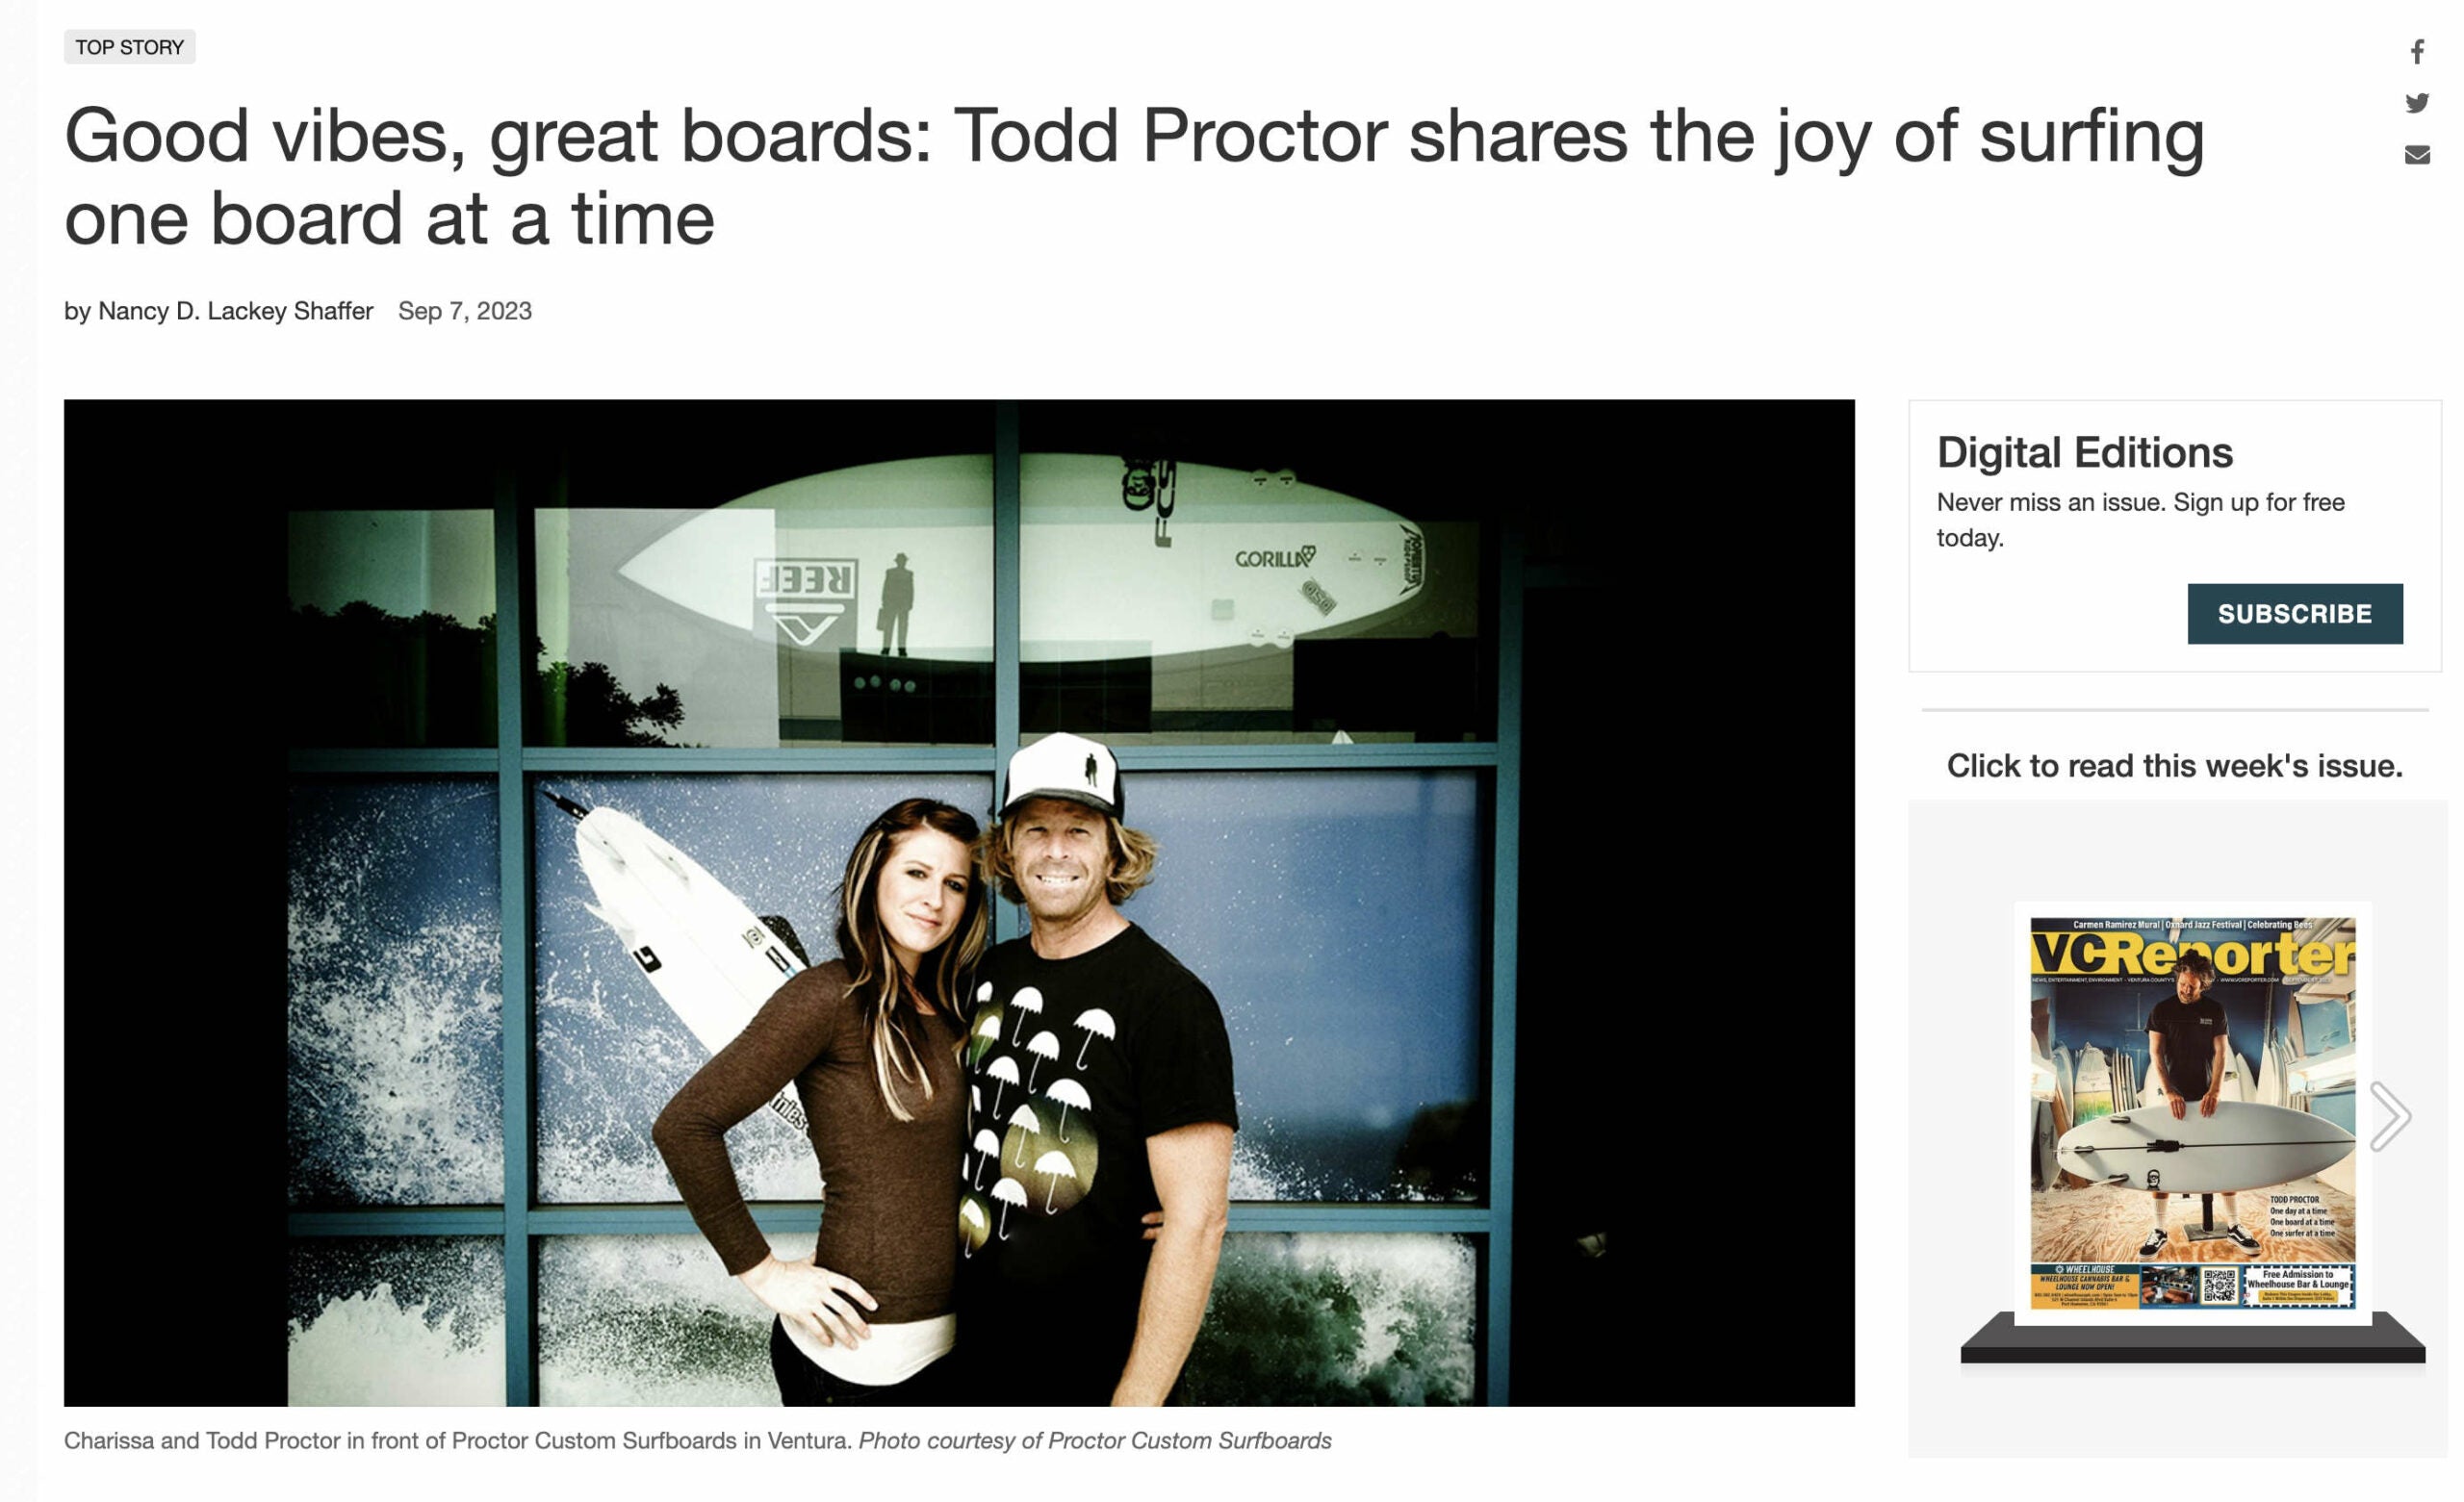 GOOD VIBES, GREAT BOARDS: TODD PROCTOR SHARES THE JOY OF SURFING ONE BOARD AT A TIME